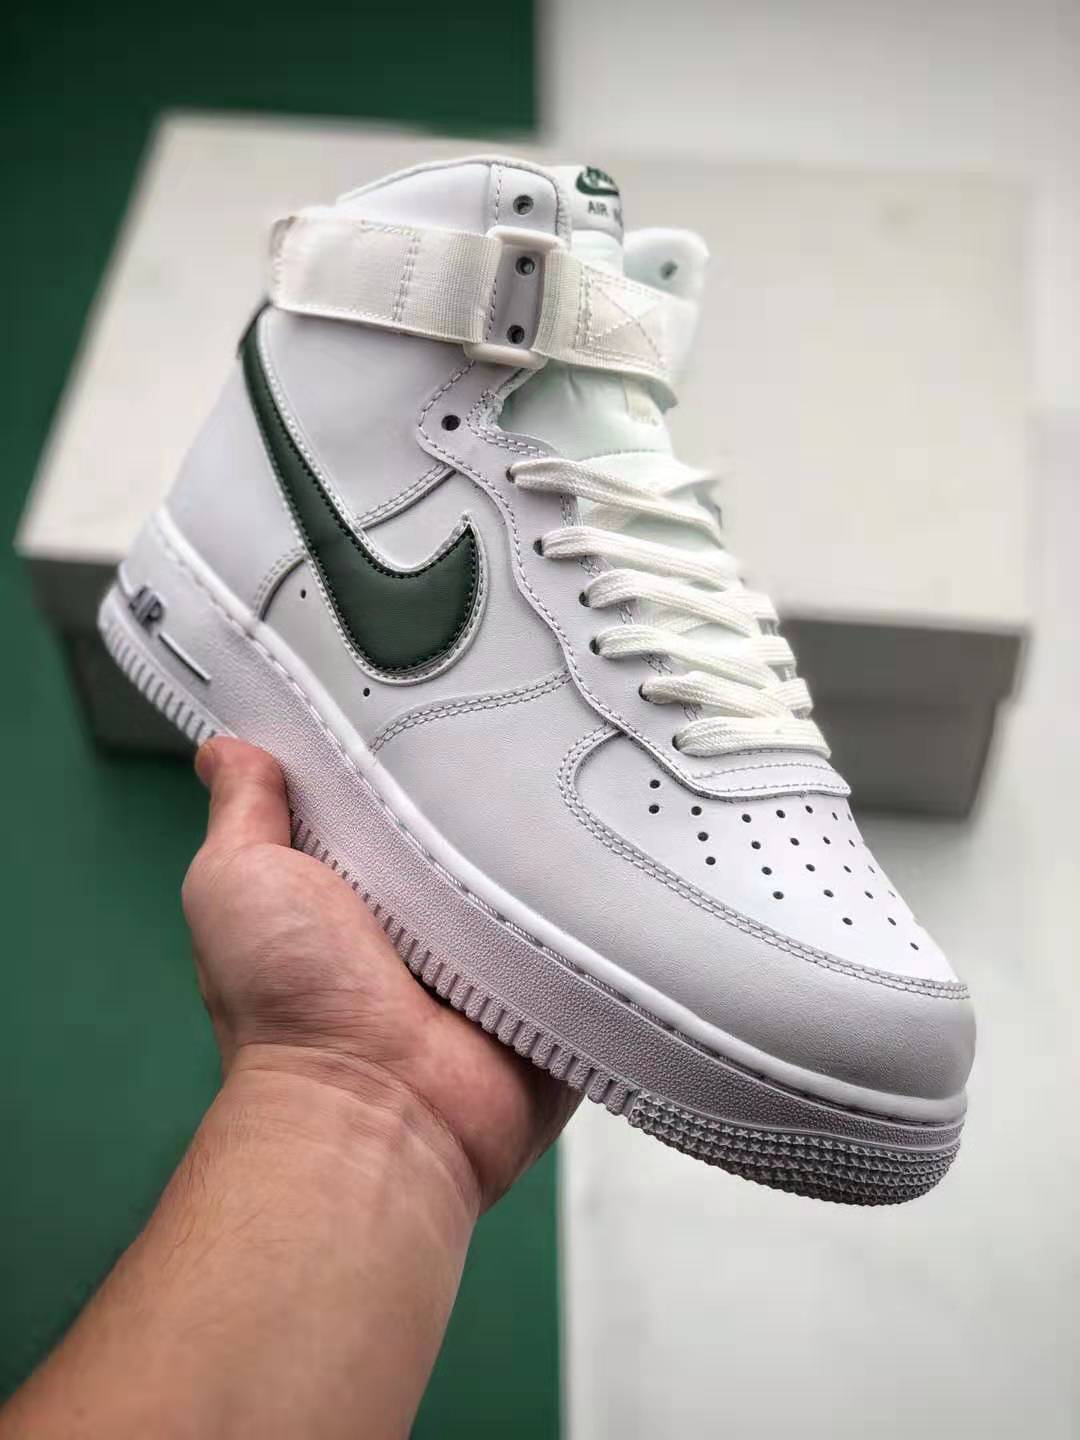 Nike Air Force 1 High 07 LV8 3 White Green AT4141-104 - Buy Now!